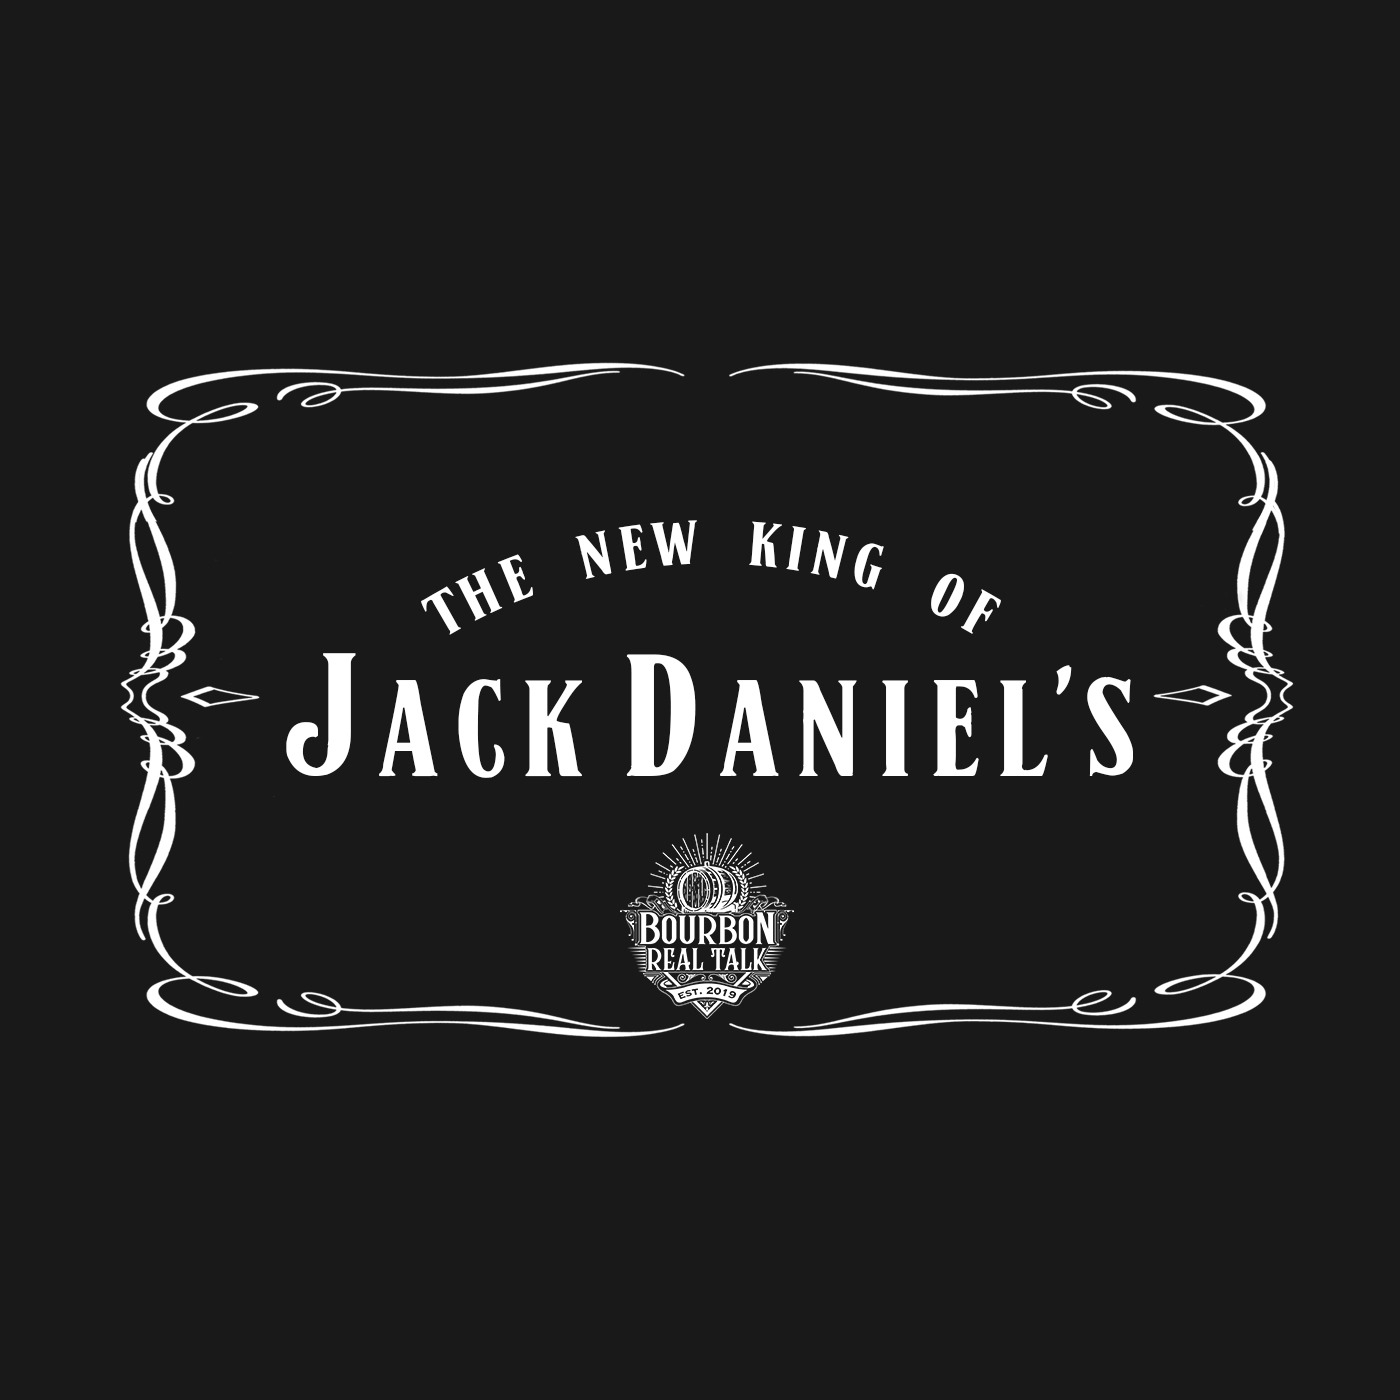 The NEW KING of Jack Daniel's